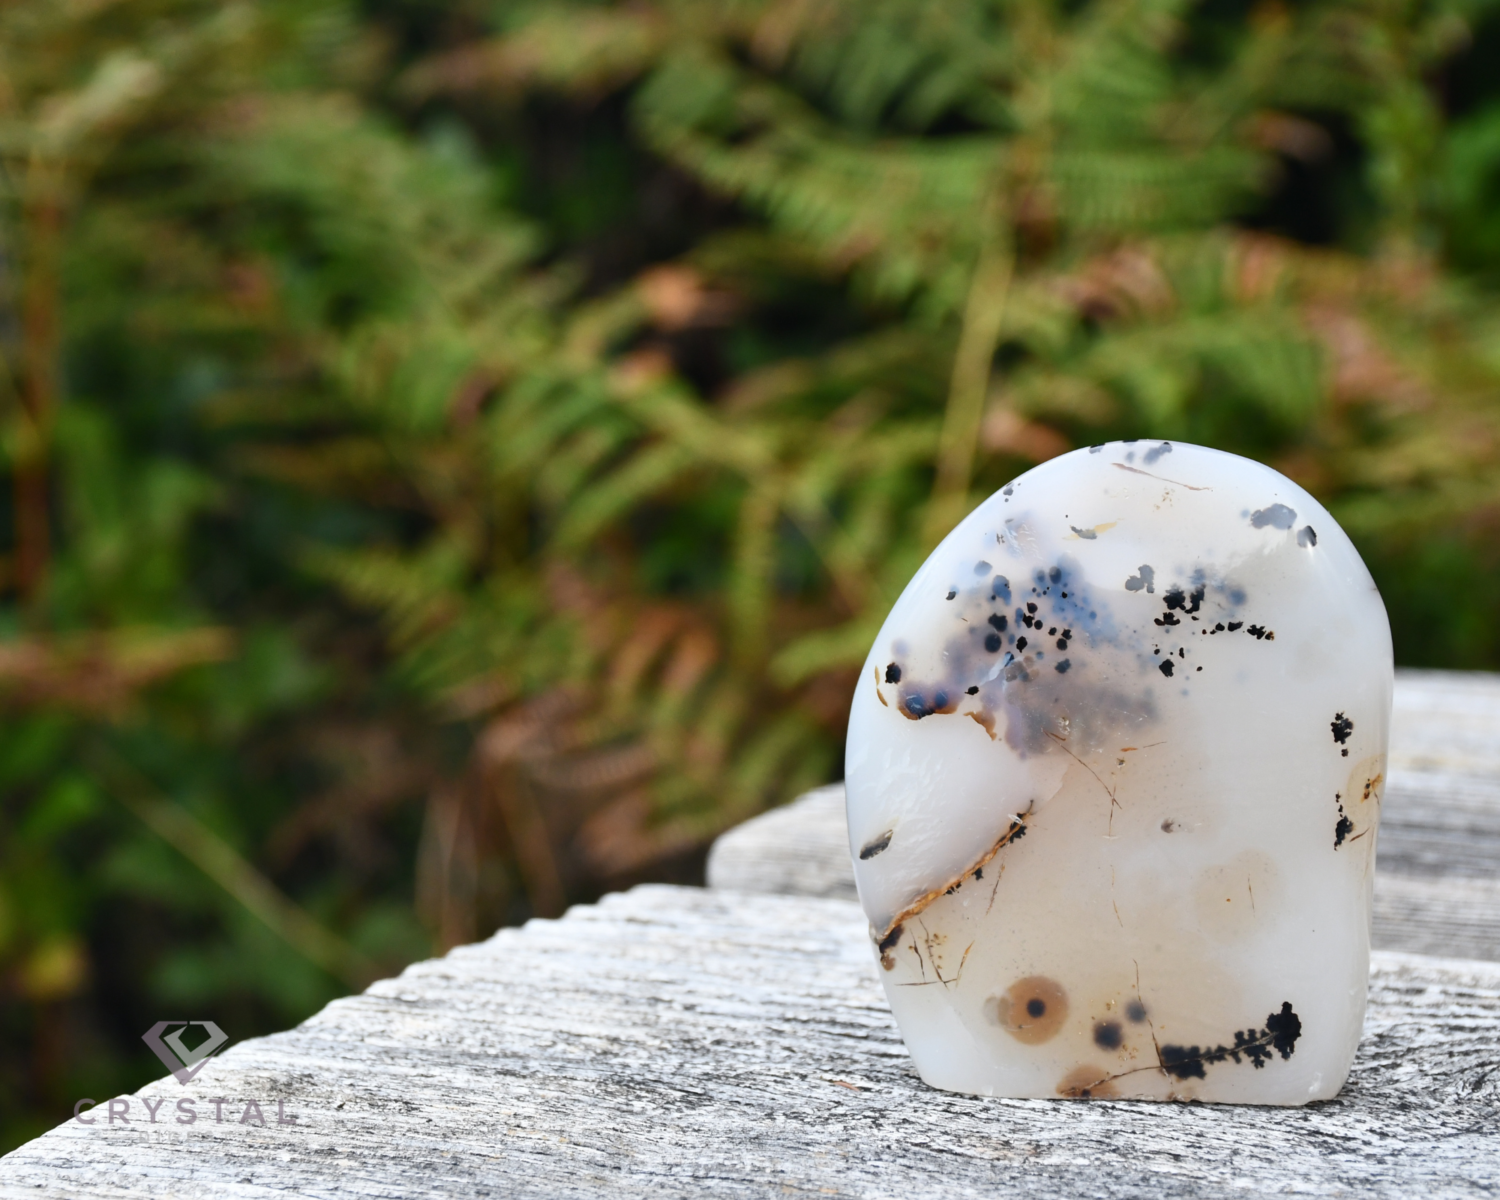 dendritic opal on a wooden table outdoors